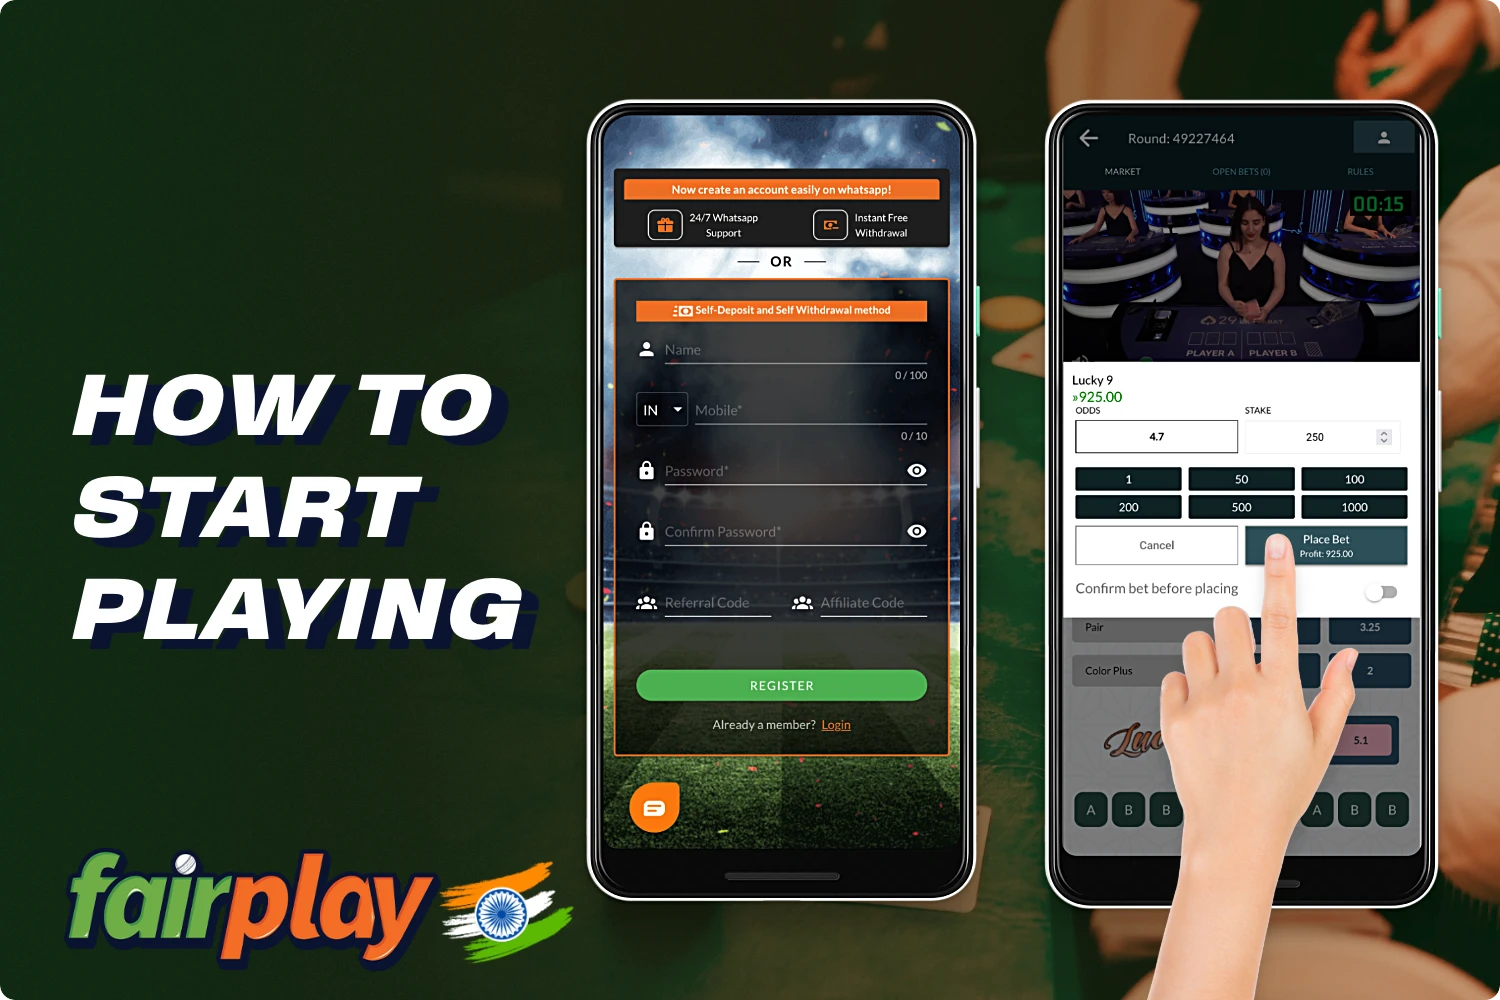 In order to start playing at Fairplay online casino you need to fulfill a few simple conditions